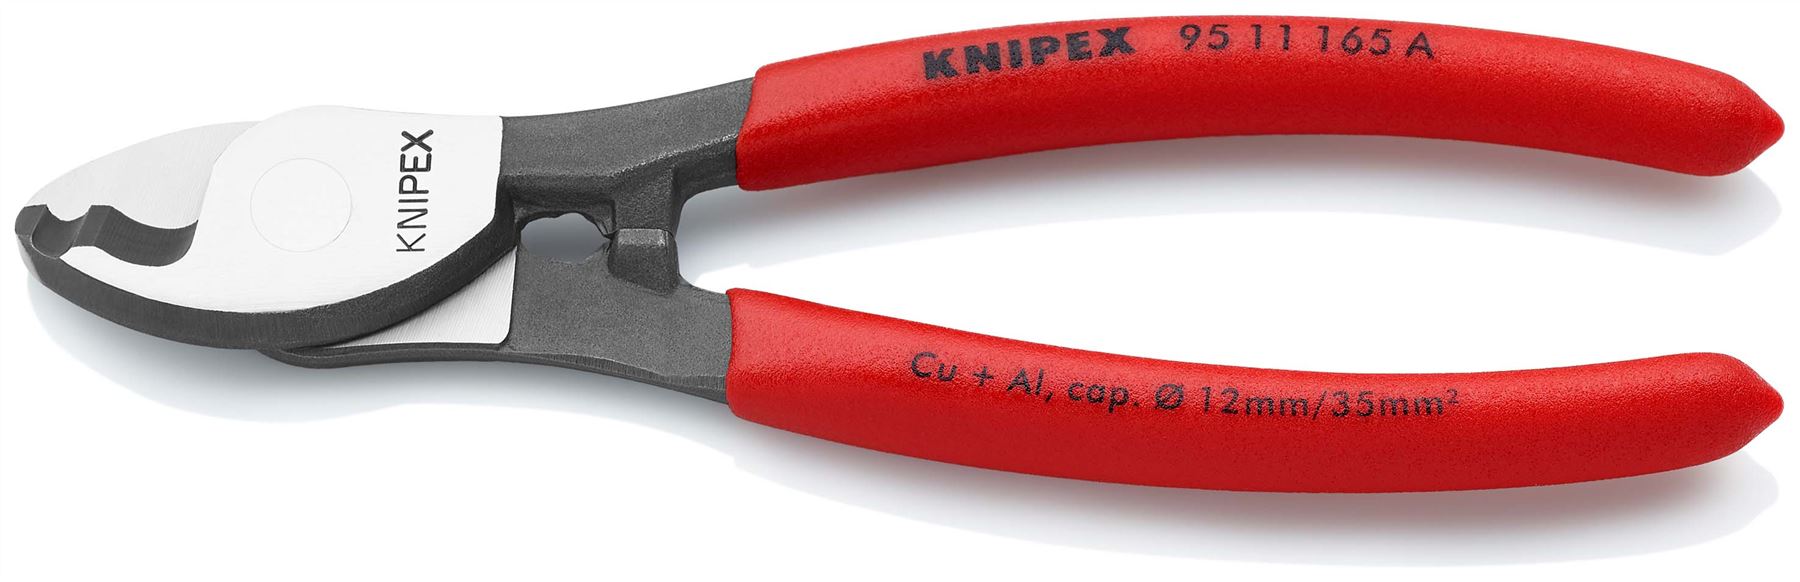 KNIPEX Cable Shears Cutting Pliers Cuts Cable up to 12mm Diameter 165mm Plastic Coated Handles 95 11 165 A